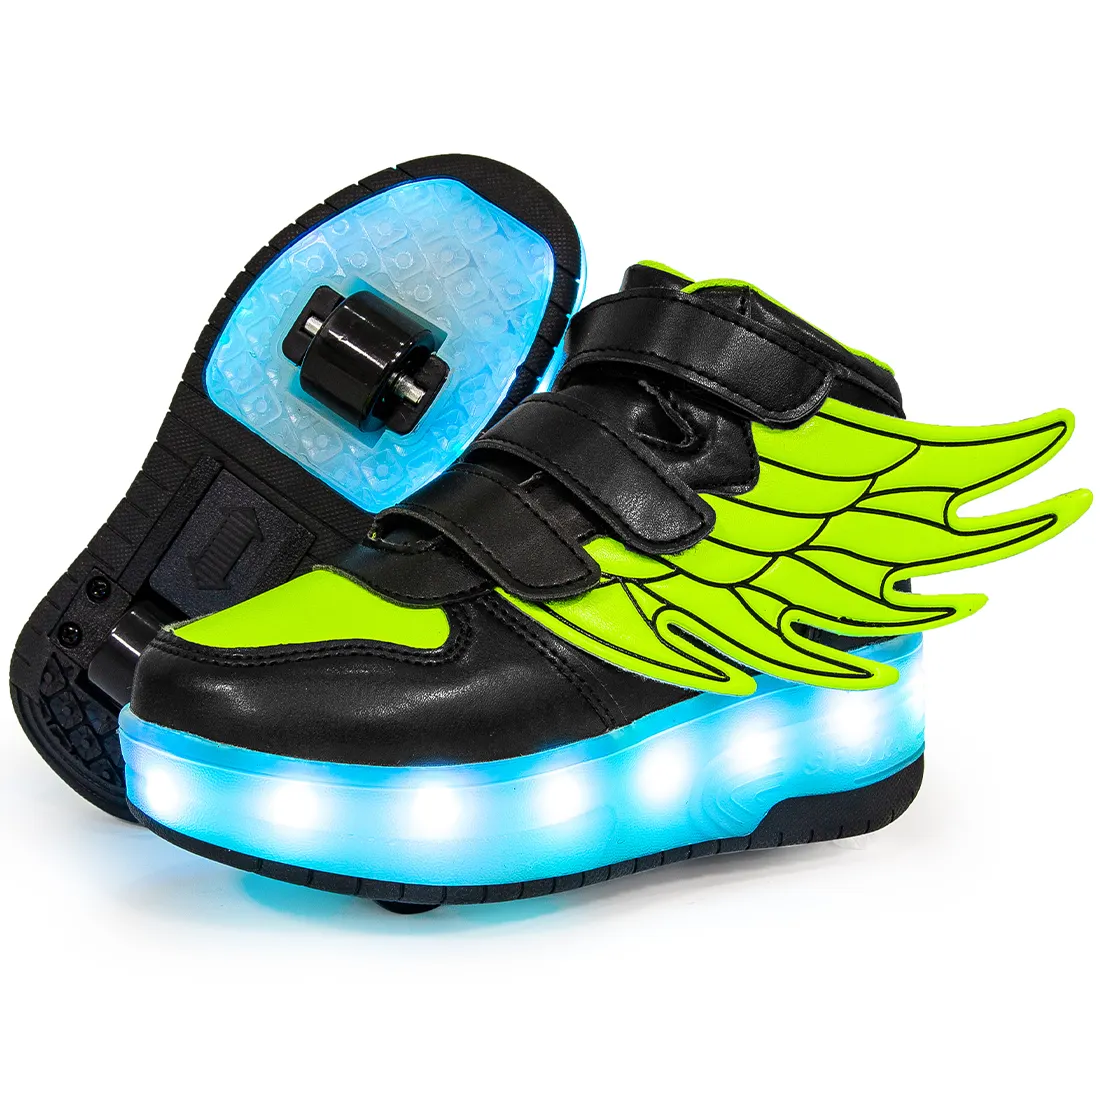 Kids Led Shoes High Top Sneakers Light Up Kick Roller Skate Shoes Party Dance with Wheels Lighting Outdoor Sports Casual Shoes